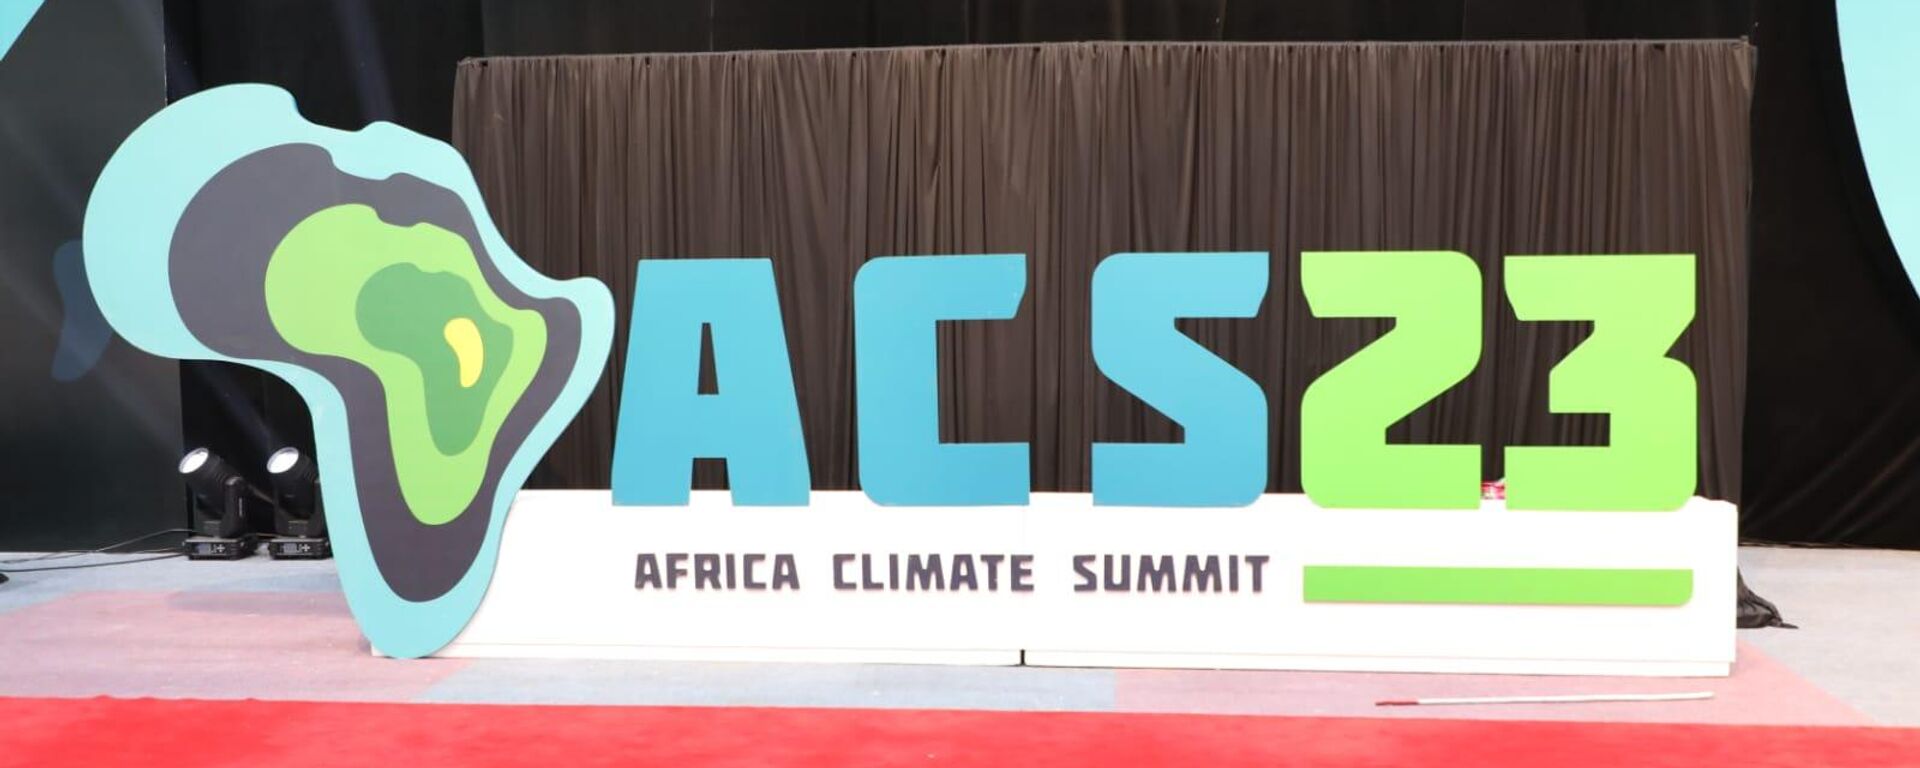 the first Africa Climate Summit 2023 - Sputnik Africa, 1920, 04.09.2023